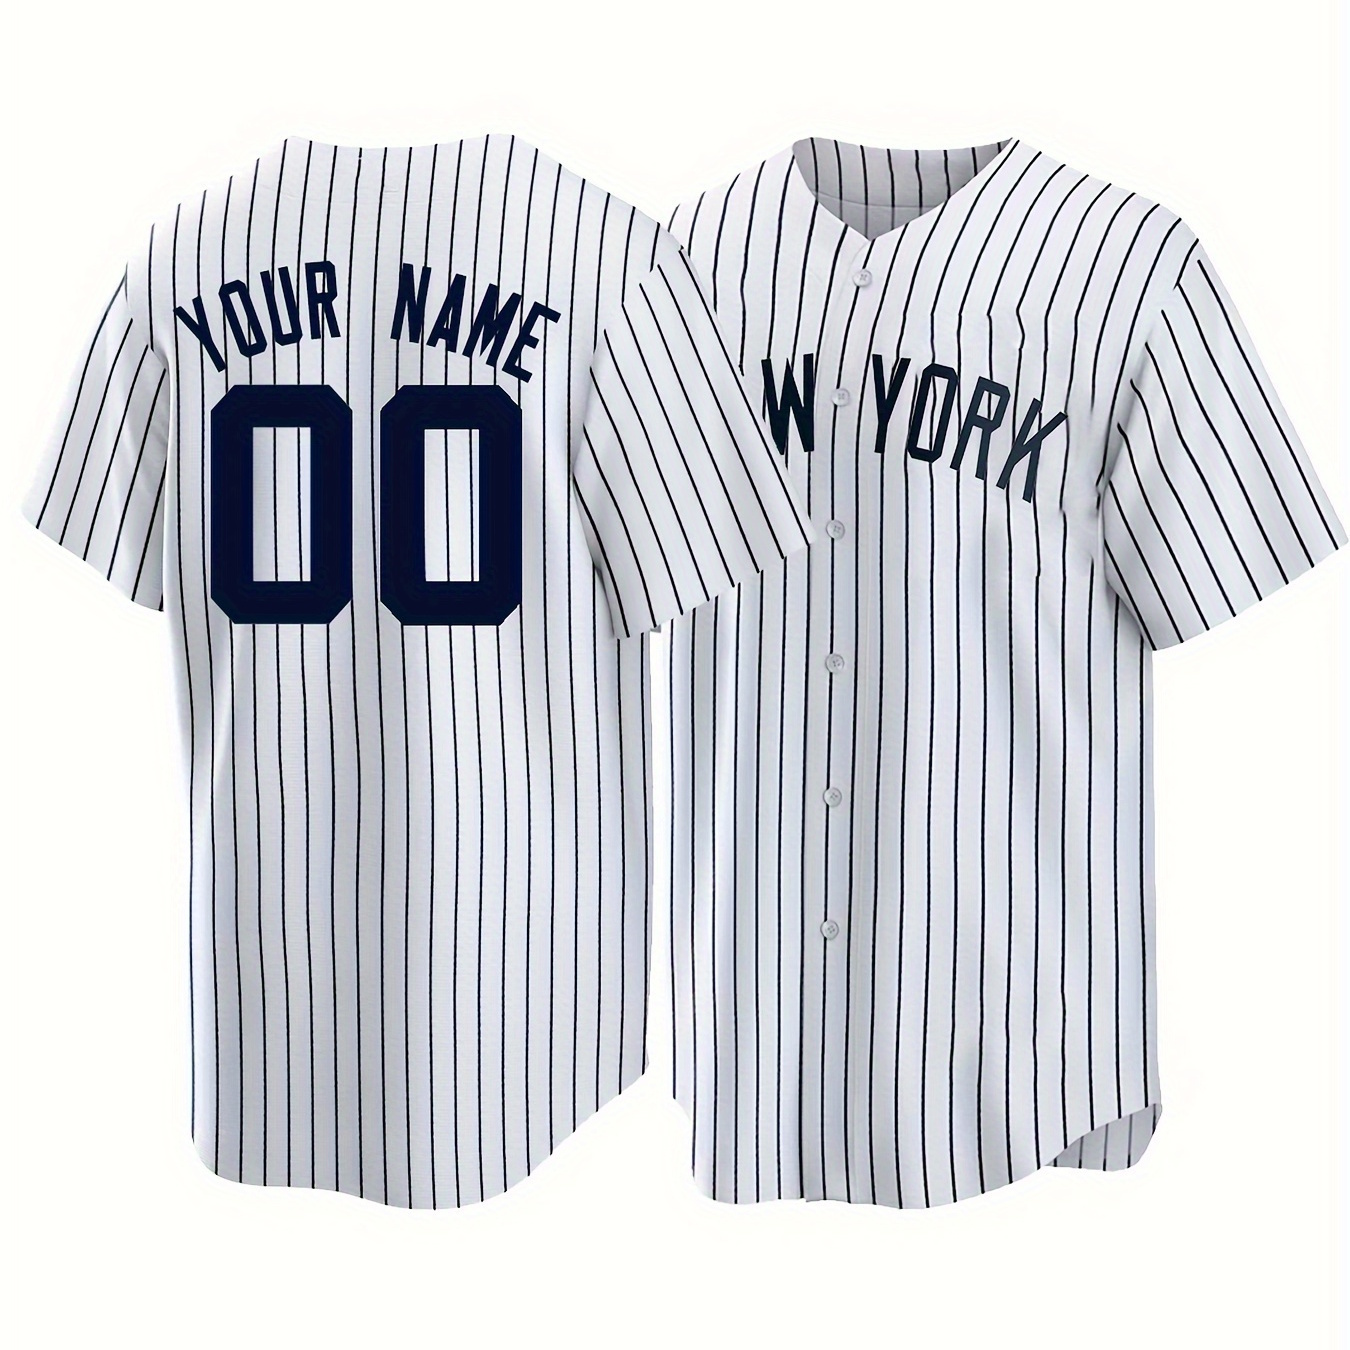 

Men's Customized Name & Number Striped Baseball Jersey, Tailored To Your Preference, Comfy Top For Summer Sport